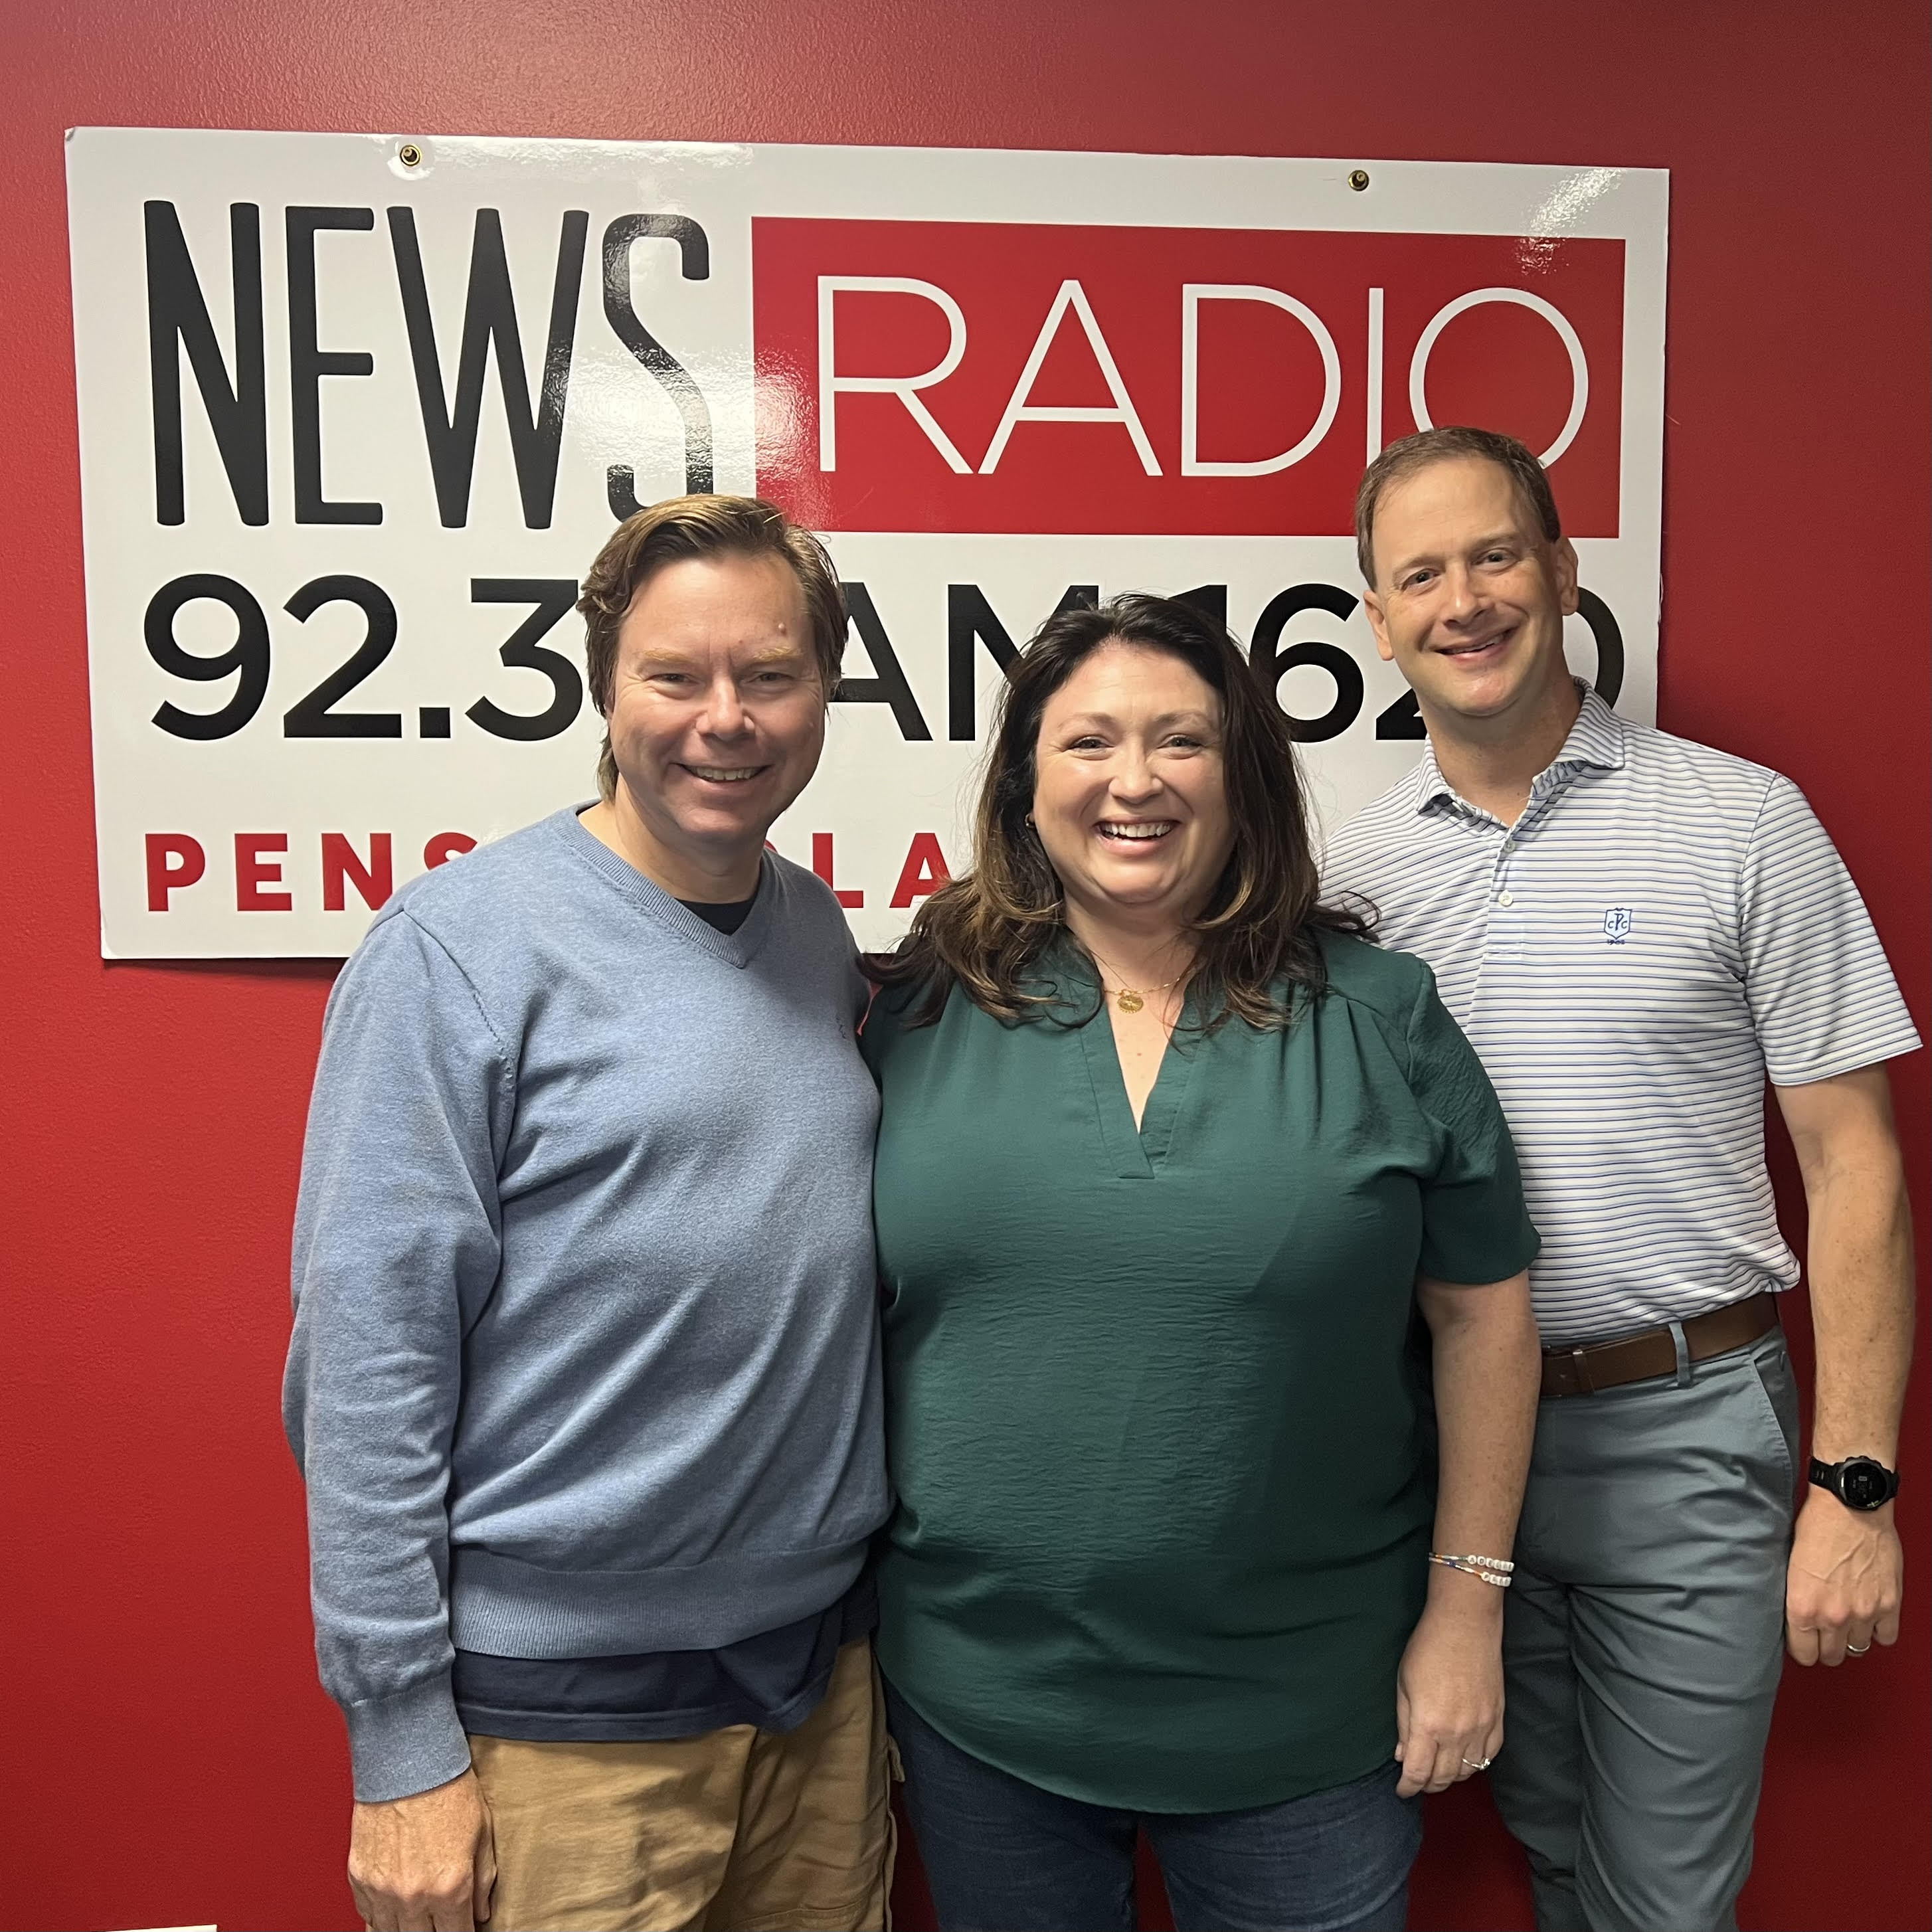 04/26/24 The Wrap with Anna Higgins, Senior Policy Advisor at Team 180 Consulting, and Jack Zoesch, attorney at Beggs & Lane